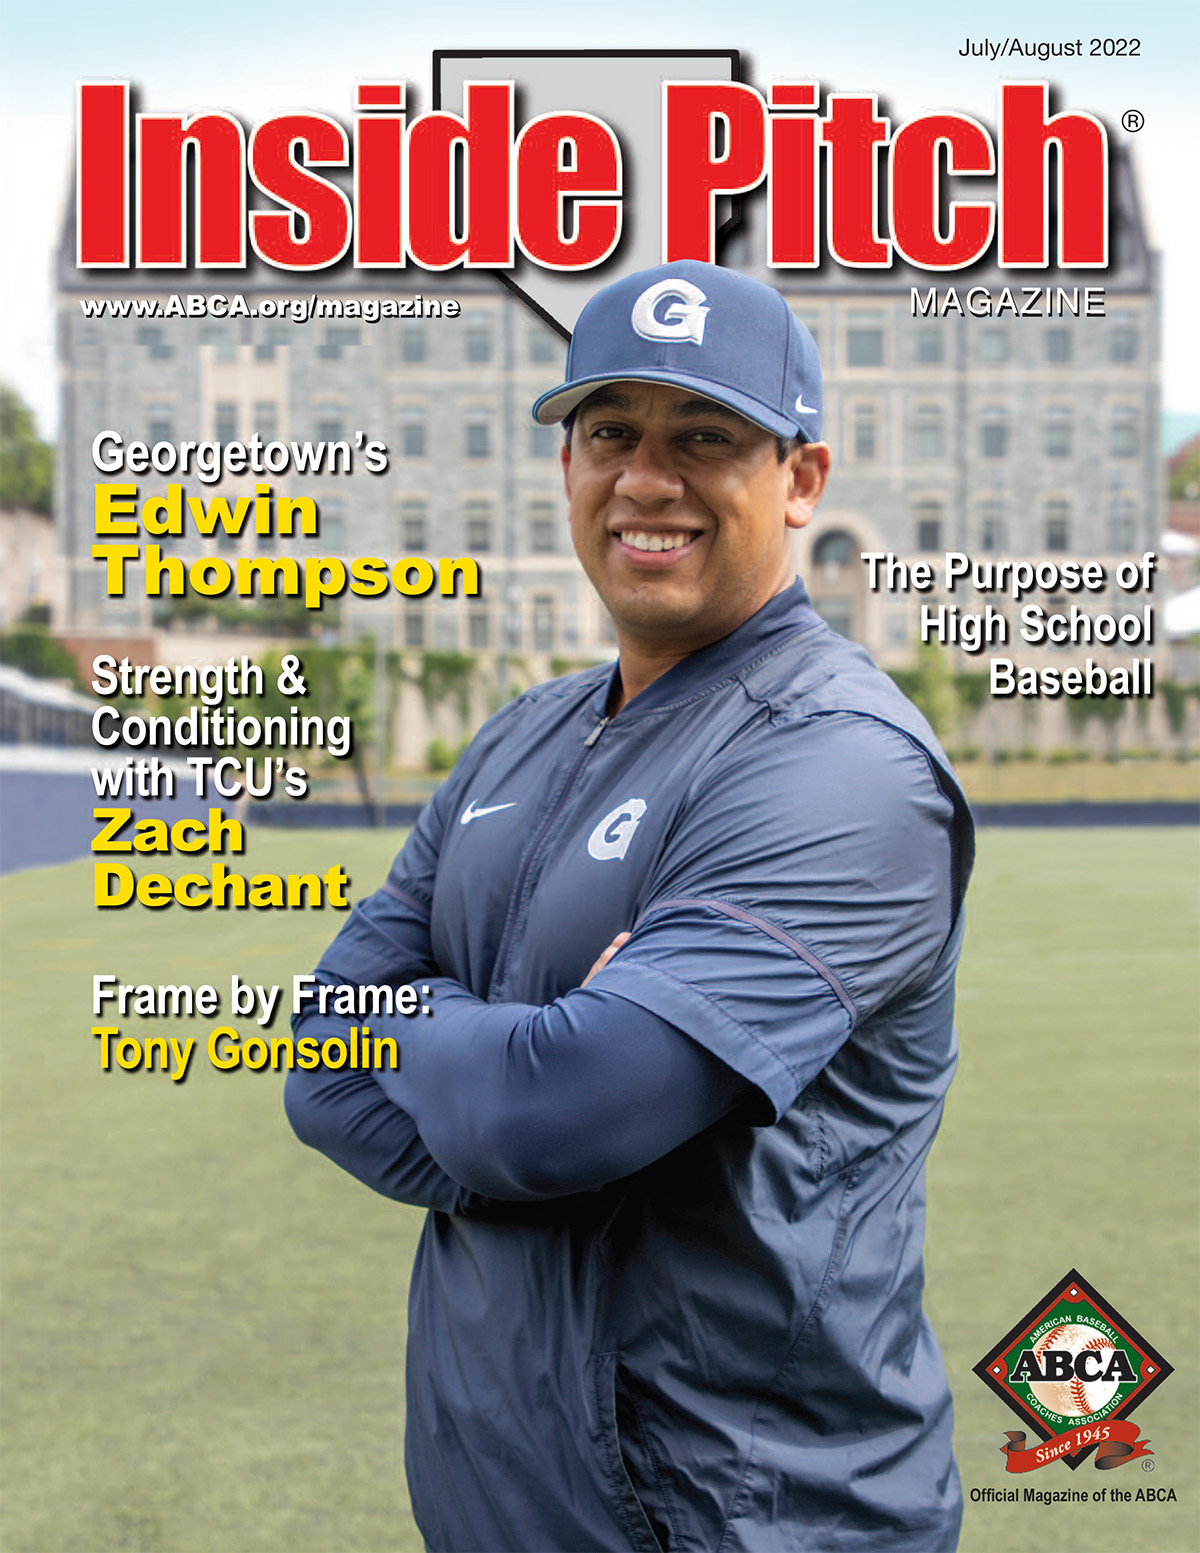 Inside Pitch Magazine July August 2022 Issue